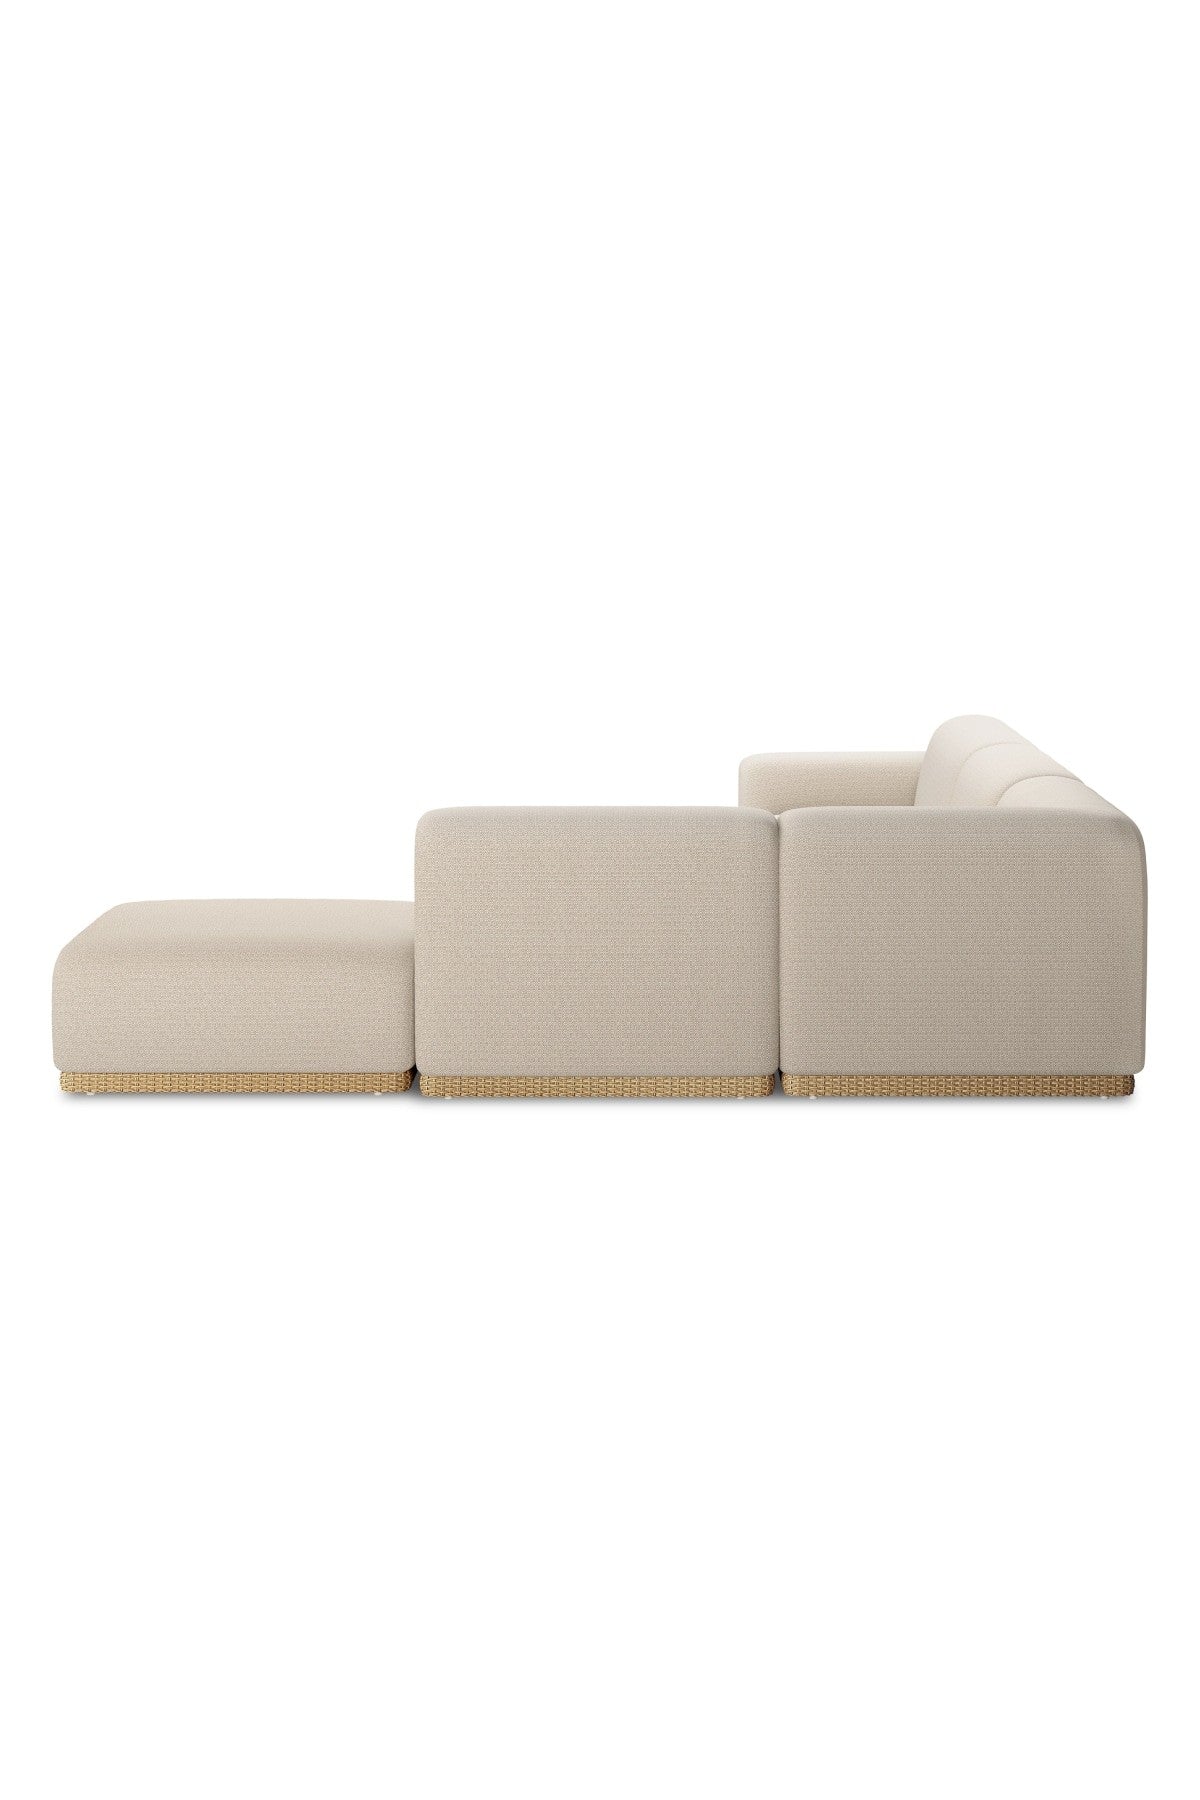 Romley Outdoor 4-Piece Sectional with Ottoman - 2 Styles